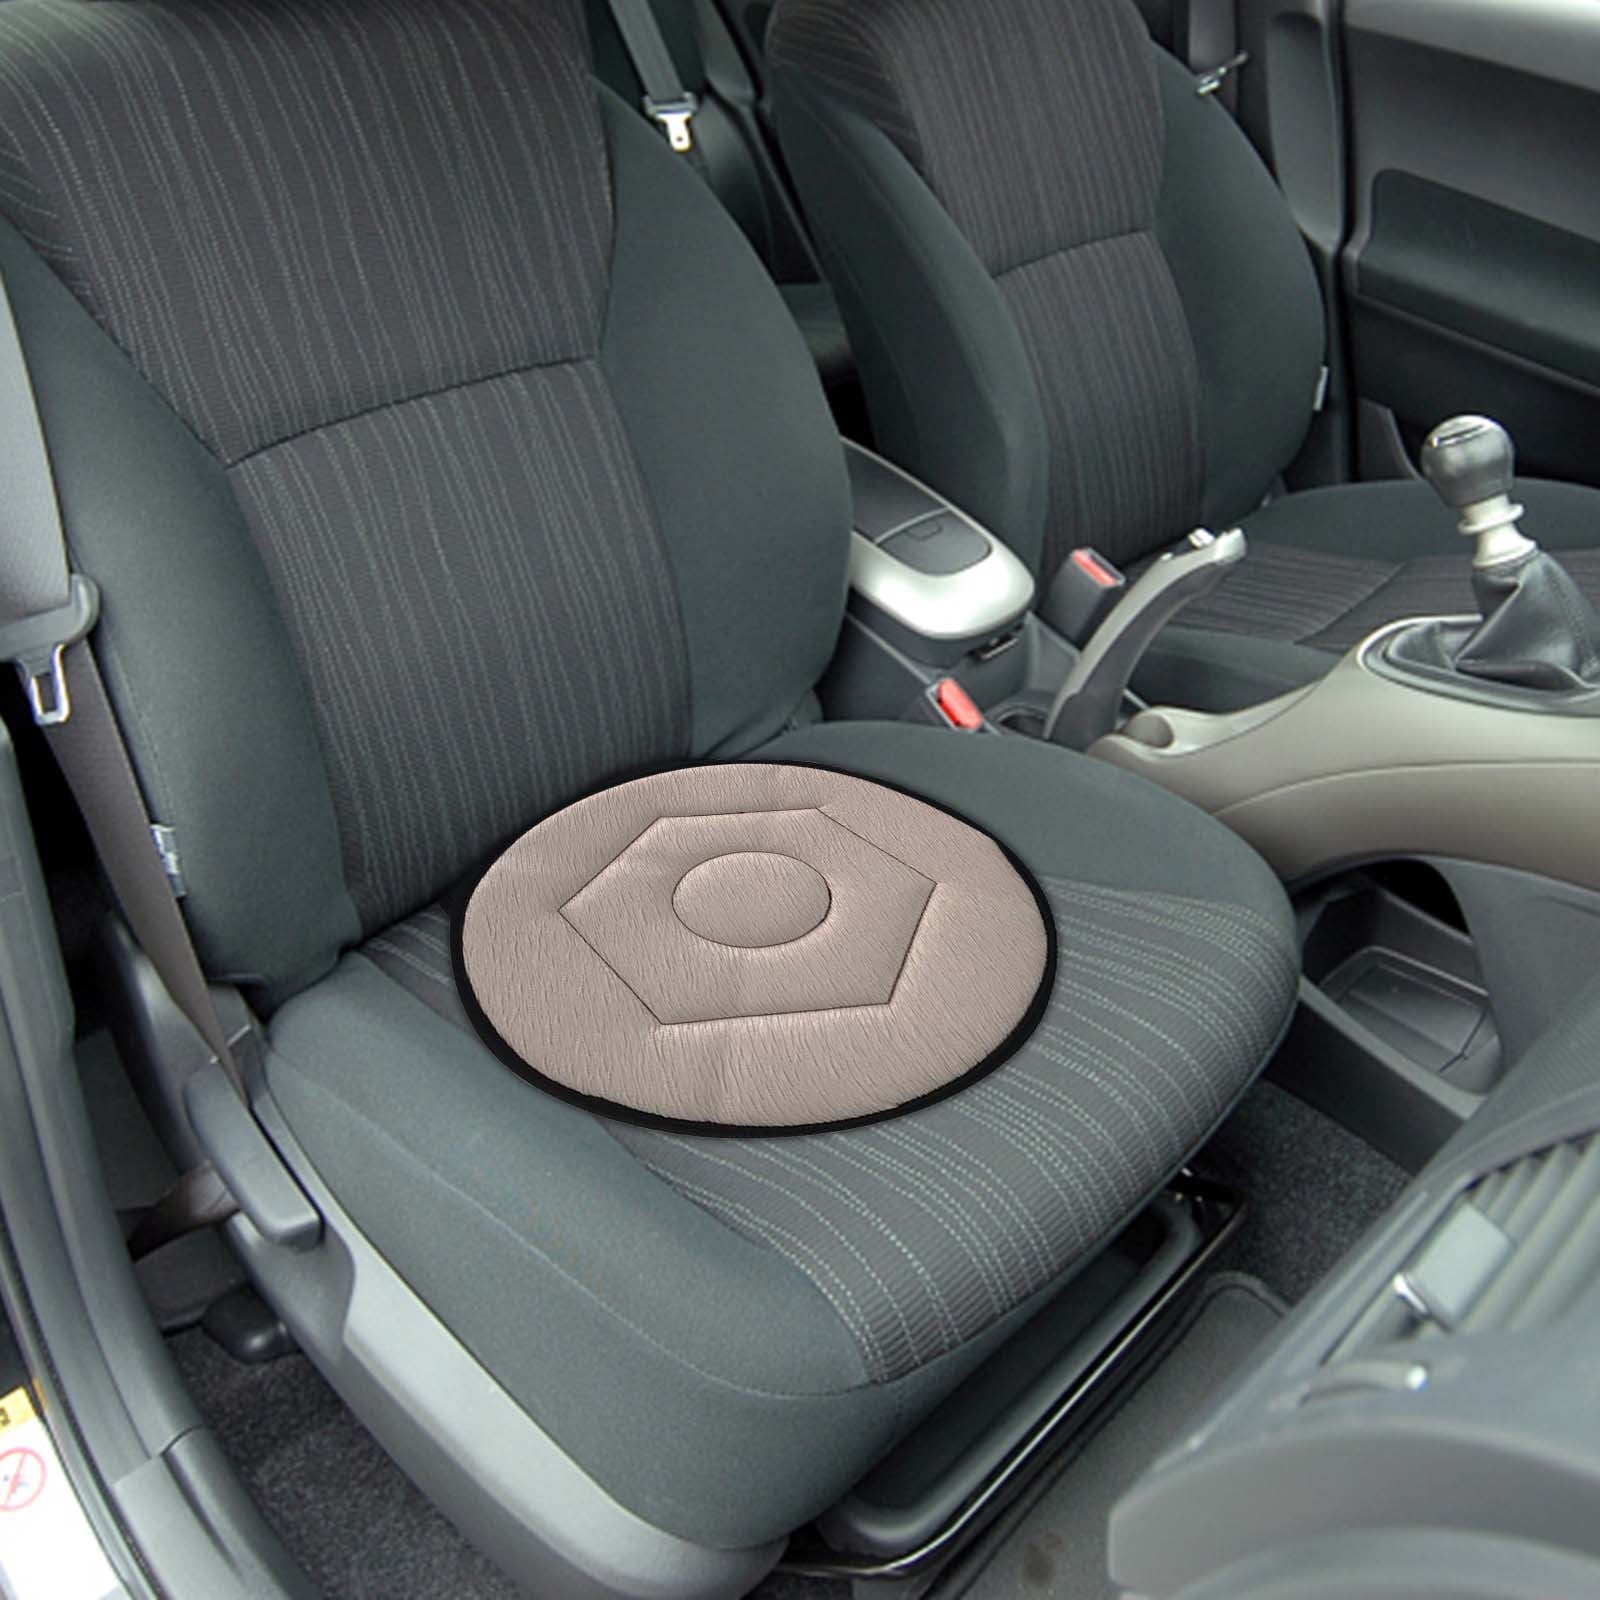 QIIBURR Car Seat Cushions for Pressure Relief 360° Rotating Seat